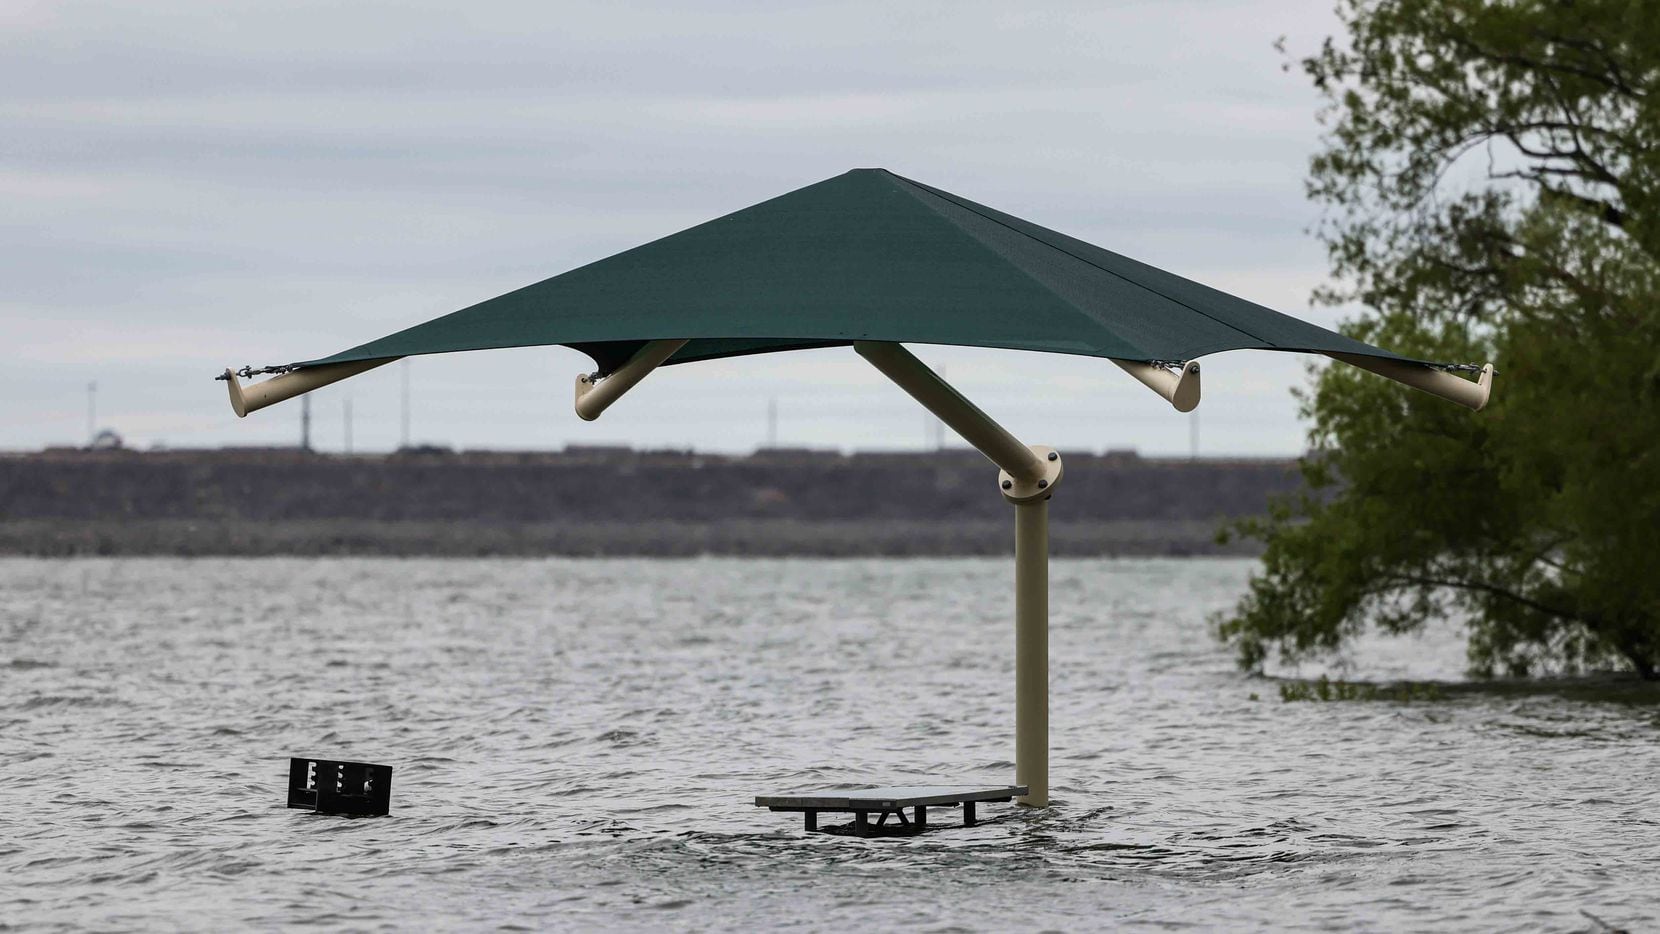 The water level at Grapevine Lake came up to the level of grills along the lake earlier this month. (Lola Gomez/The Dallas Morning News)